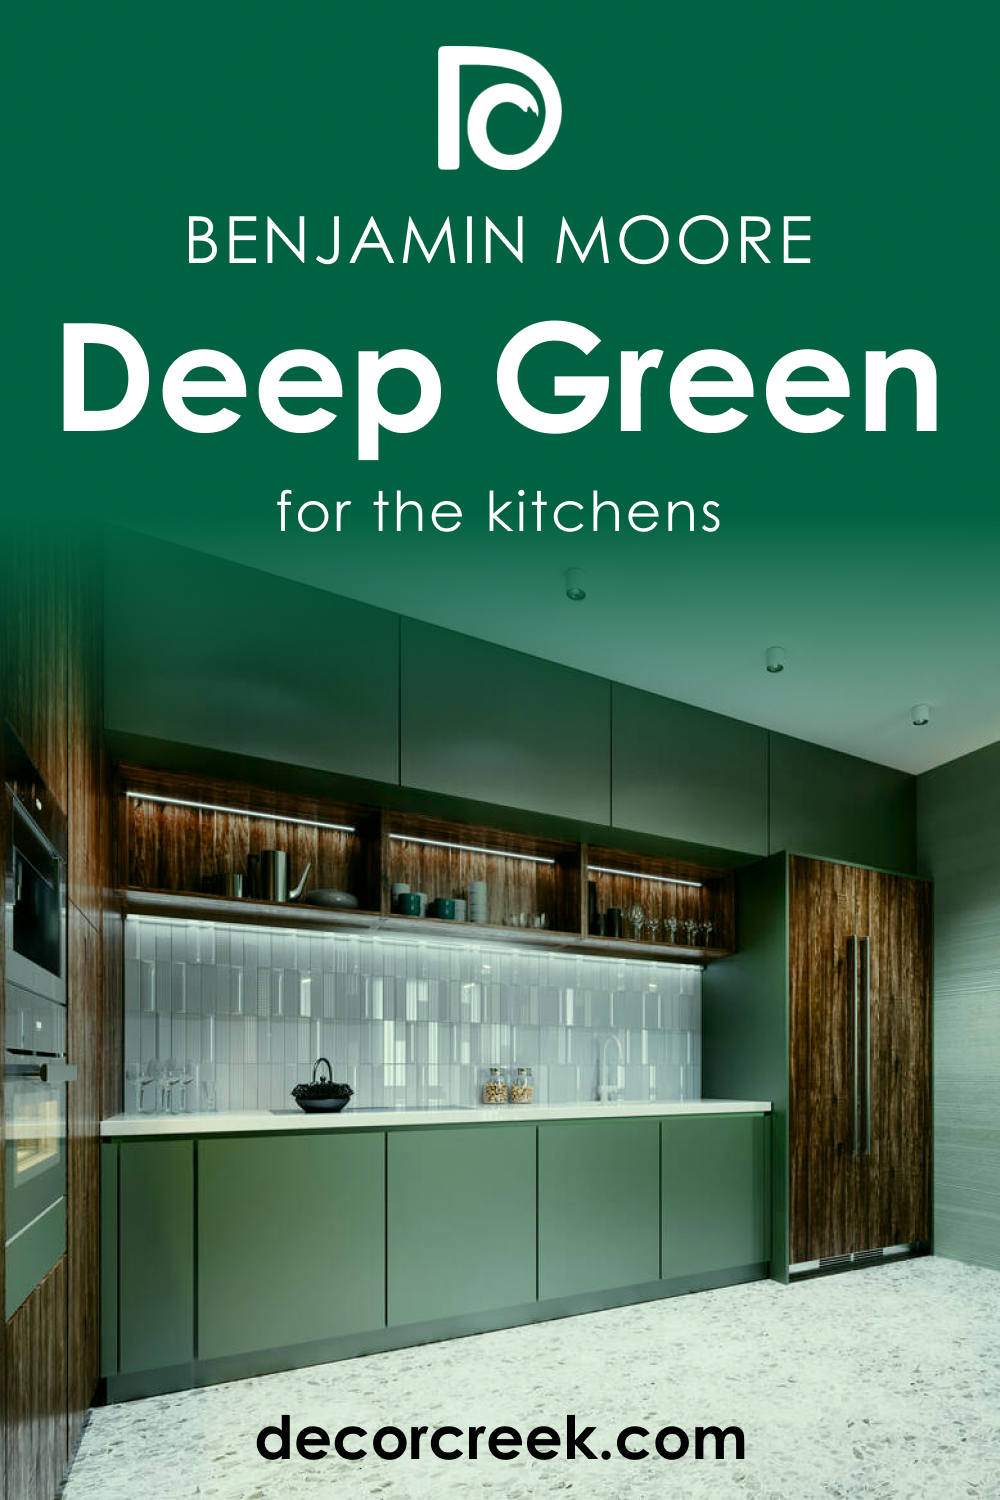 How to Use Deep Green 2039-10 in the Kitchen?